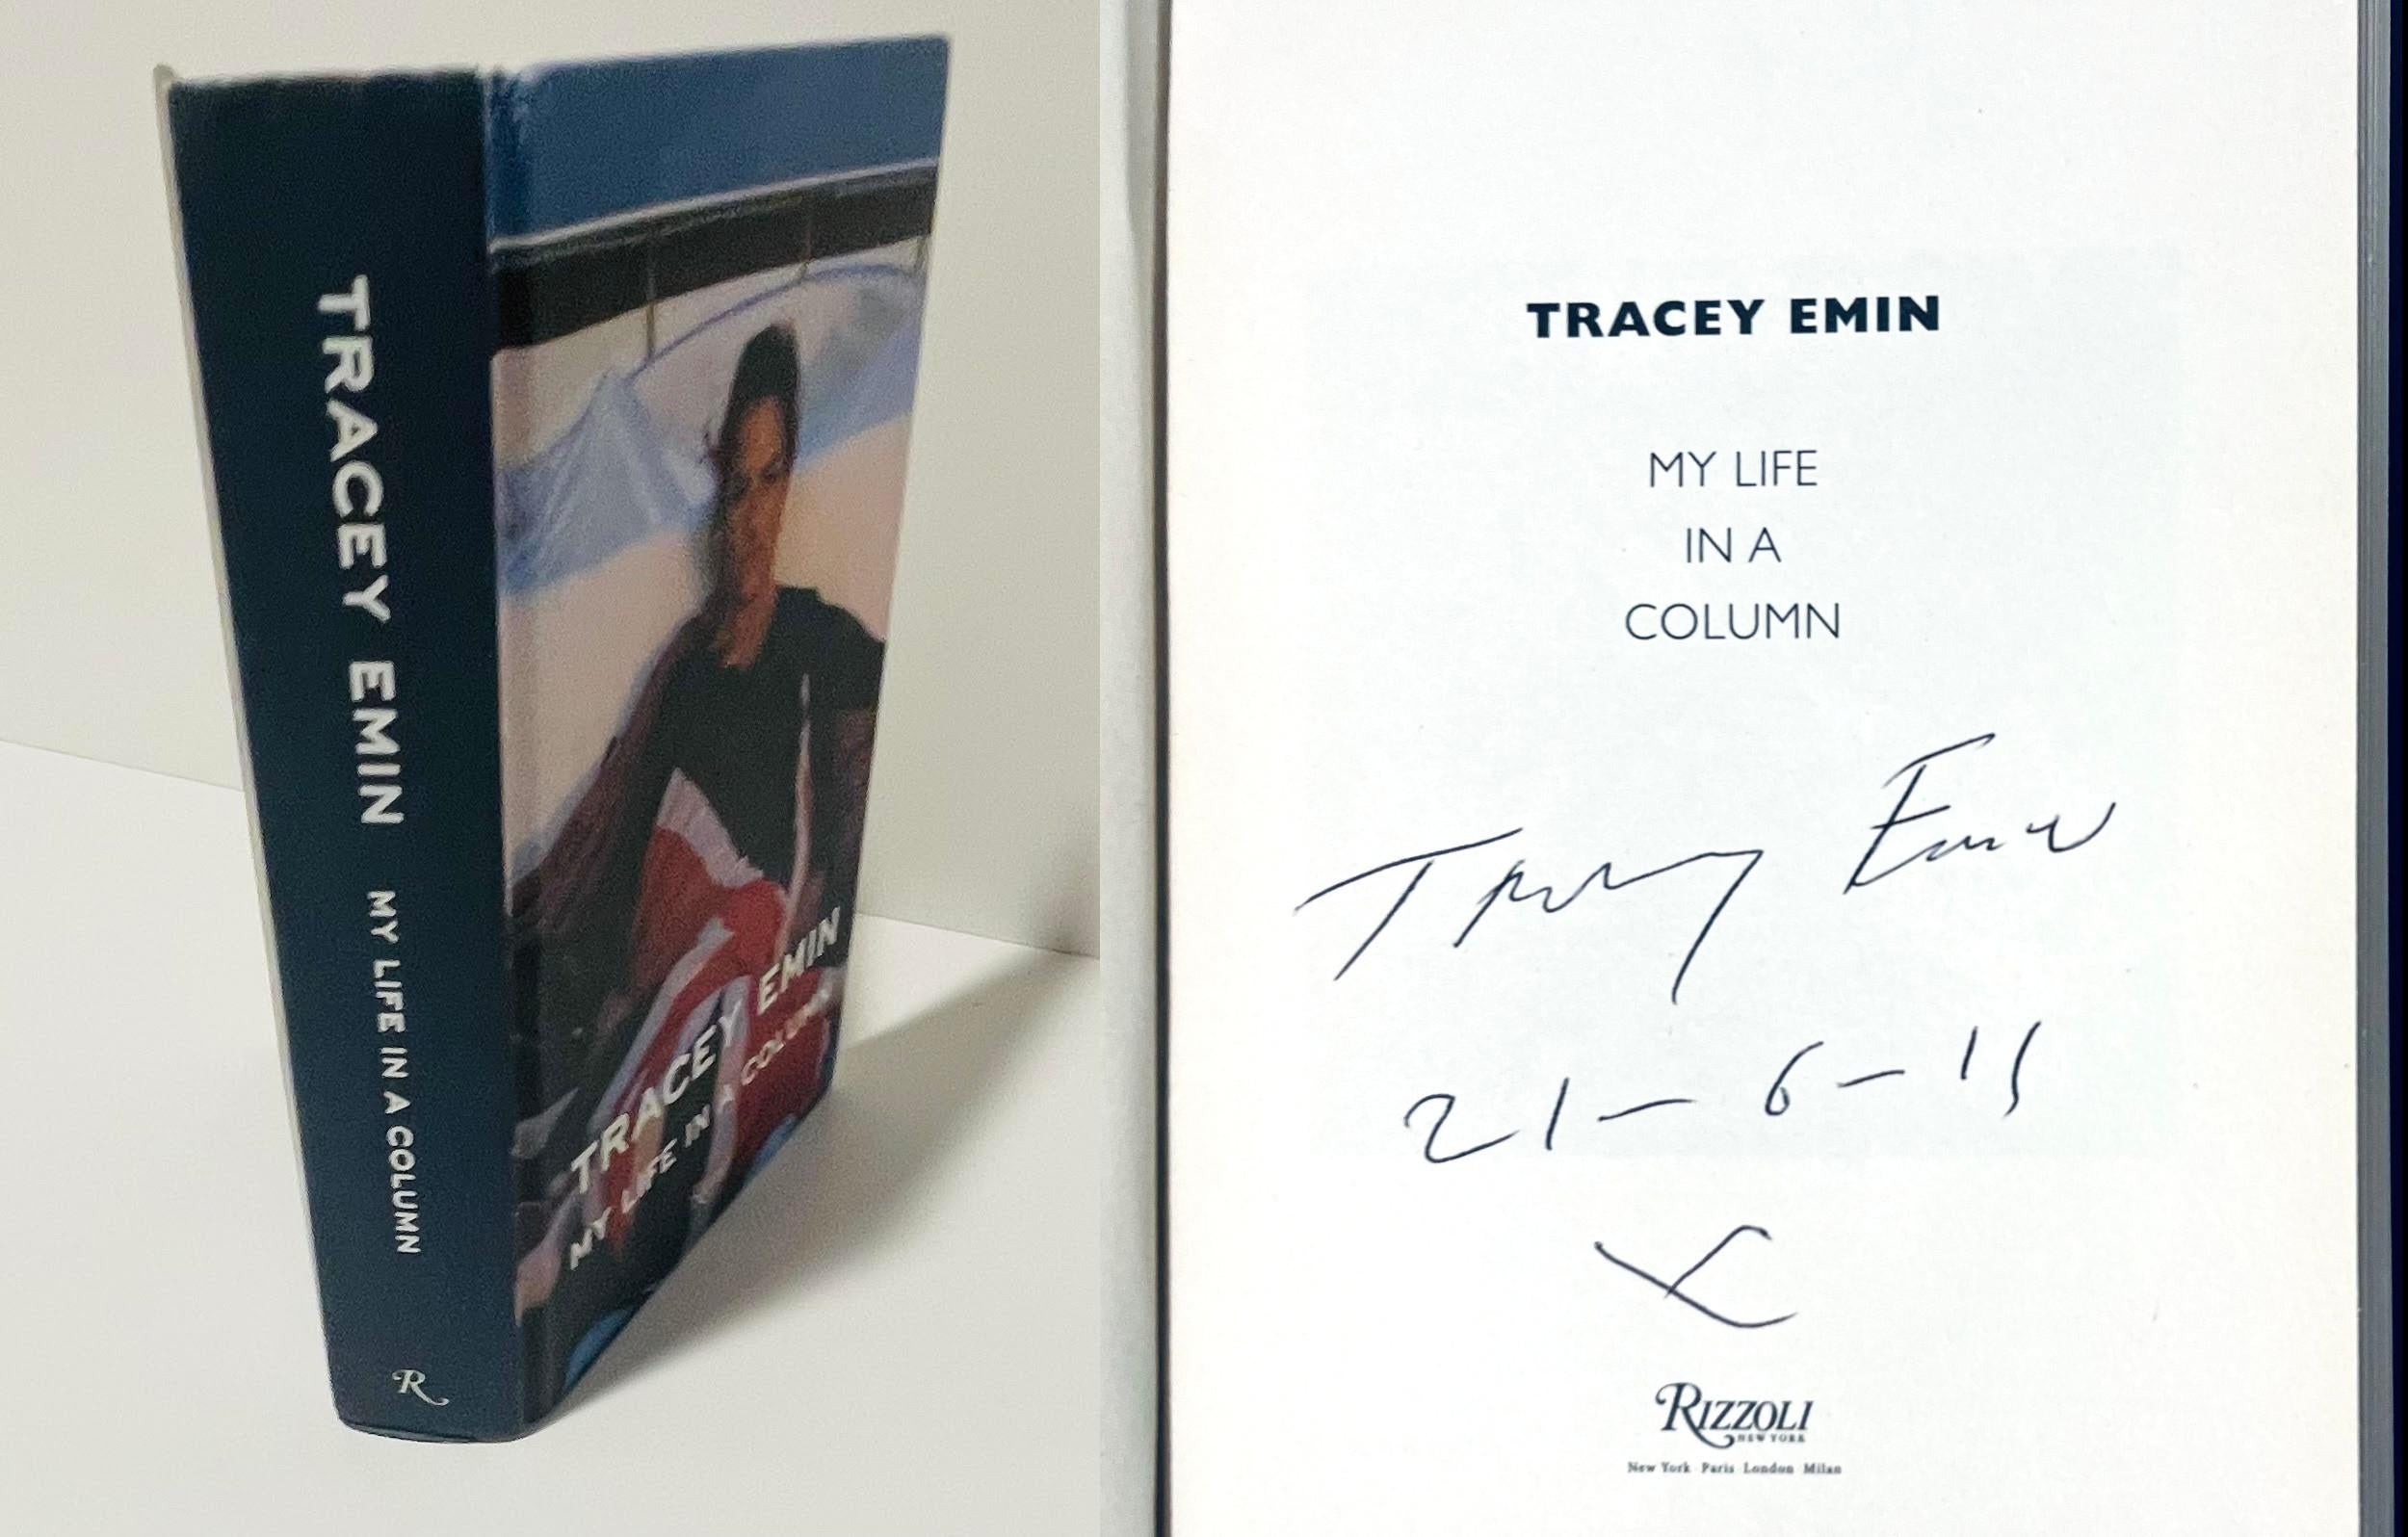 Tracey Emin
My Life in a Column (hand signed and dated by Tracey Emin), 2011
Hardback monograph with dust jacket (hand signed and dated on the title page)
hand signed and dated 21-6-11 by Tracey Emin on the title page
8 1/2 × 5 1/4 × 1 1/2